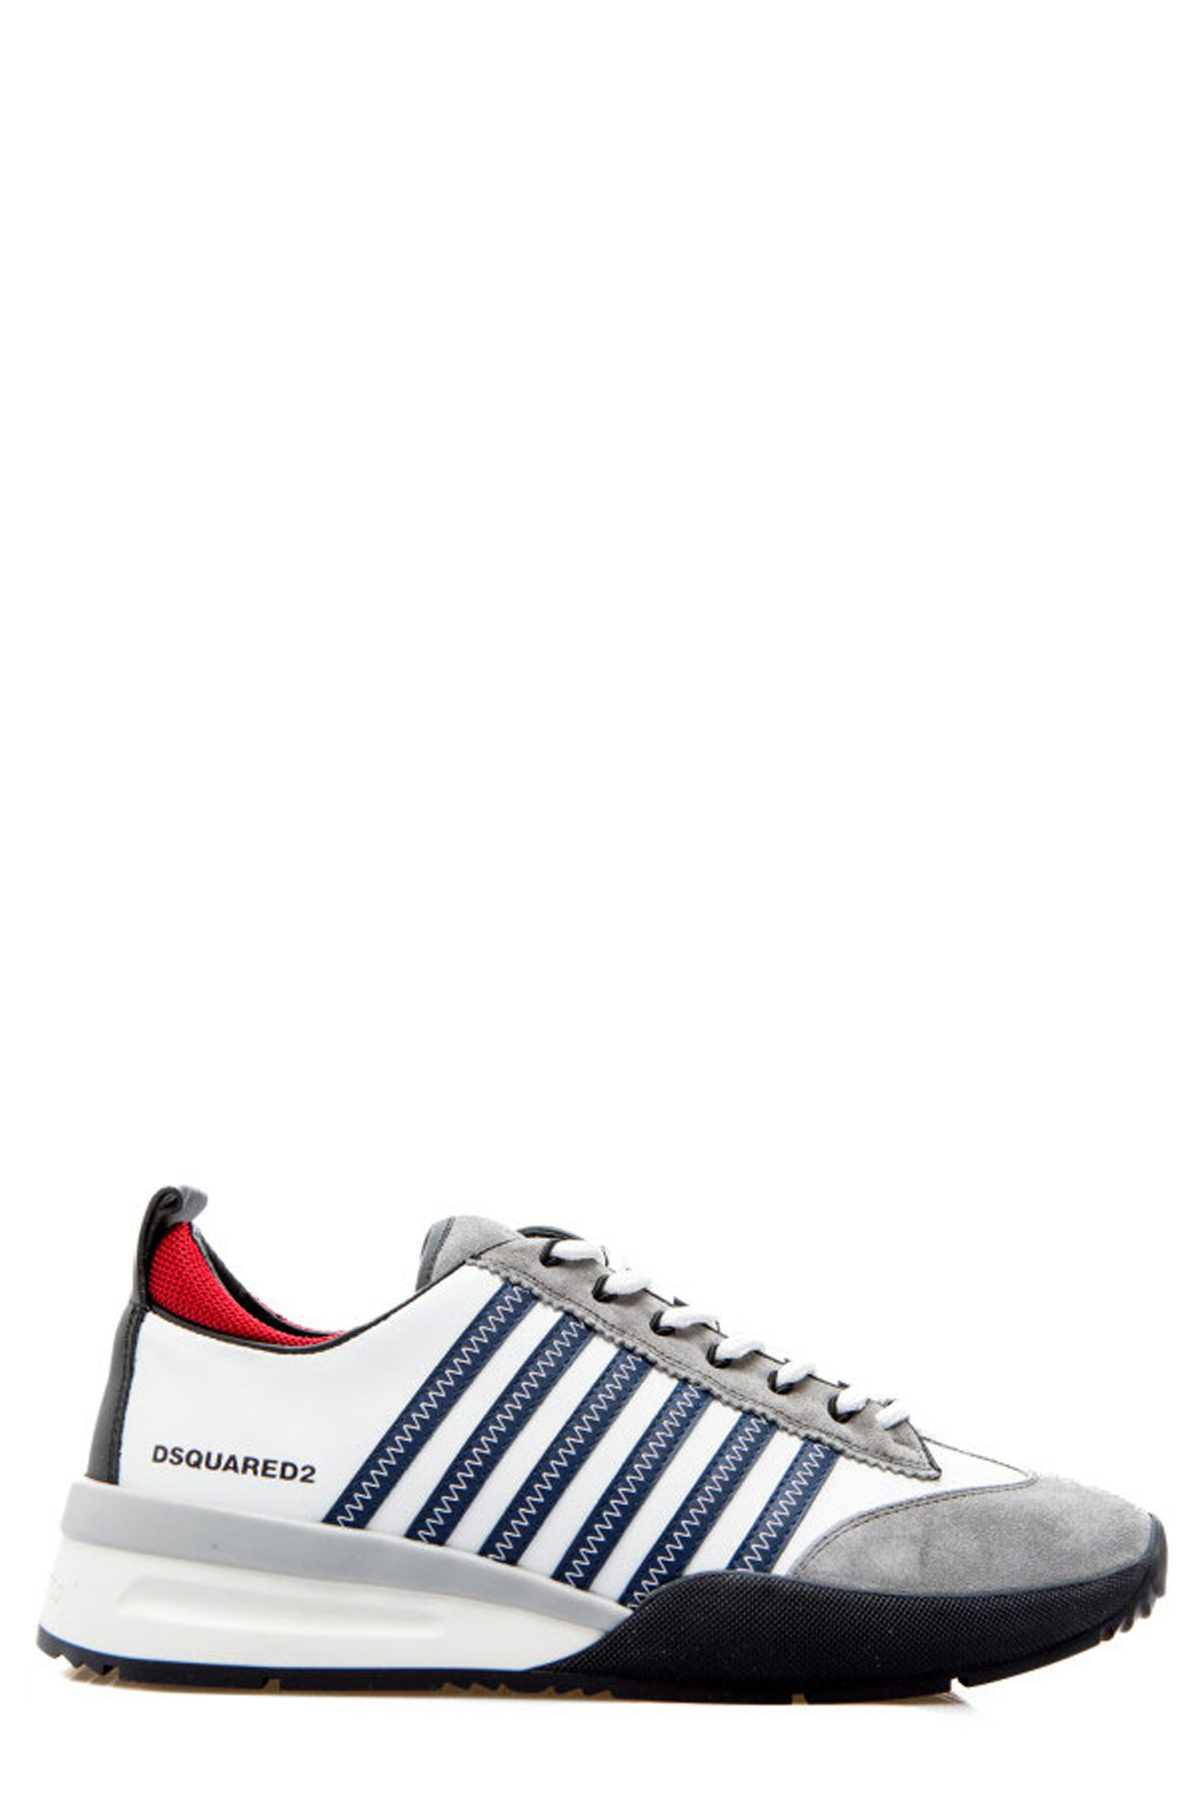 Dsquared2 : Sneaker legend White red -SNM0263 Coats leermode